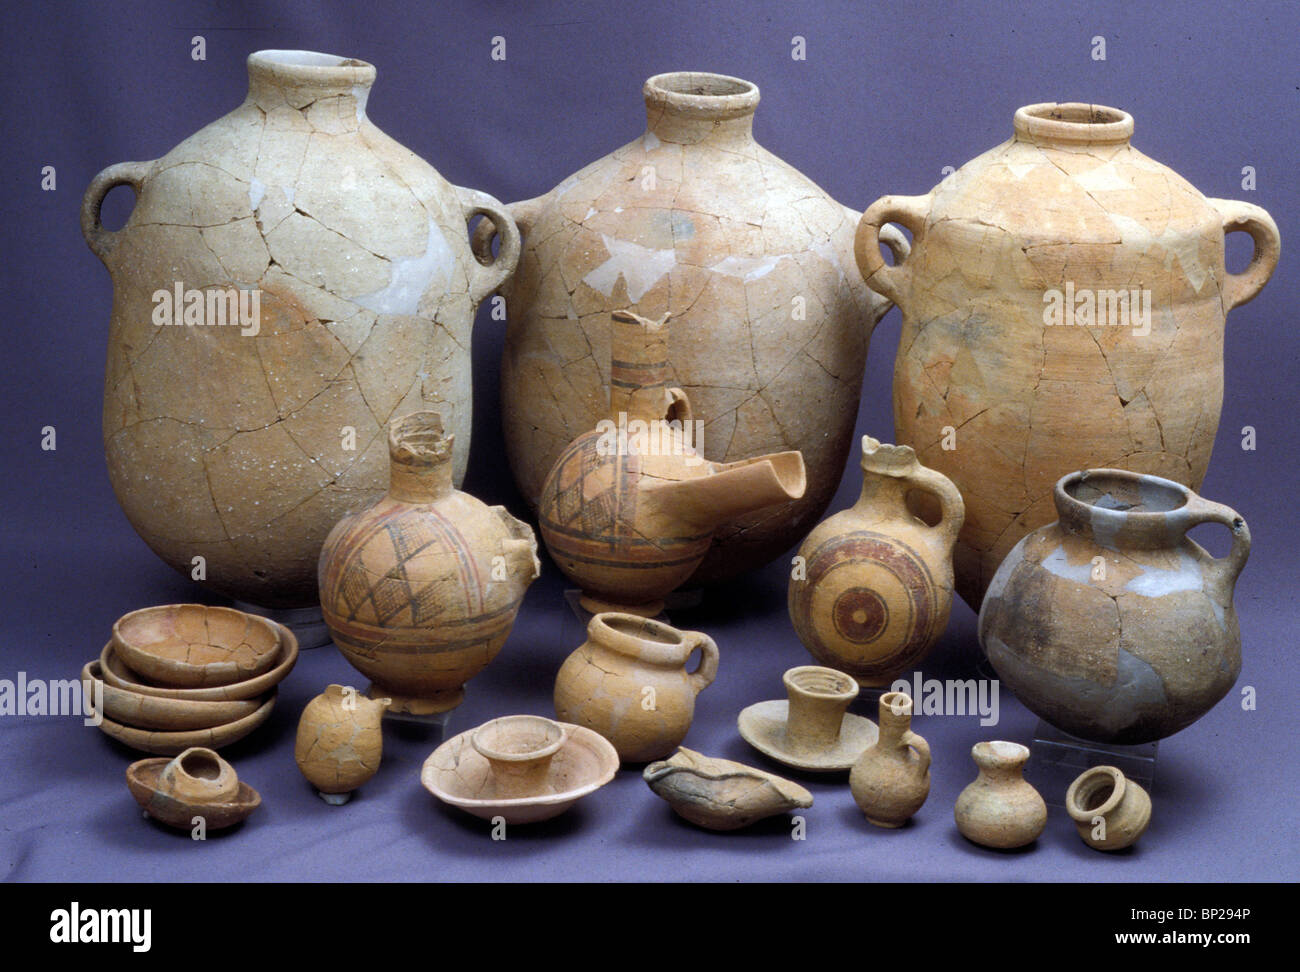 2627. CNAANITE PERIOD POTTERY DATING FROM 12 - 10TH. C. BC. Stock Photo